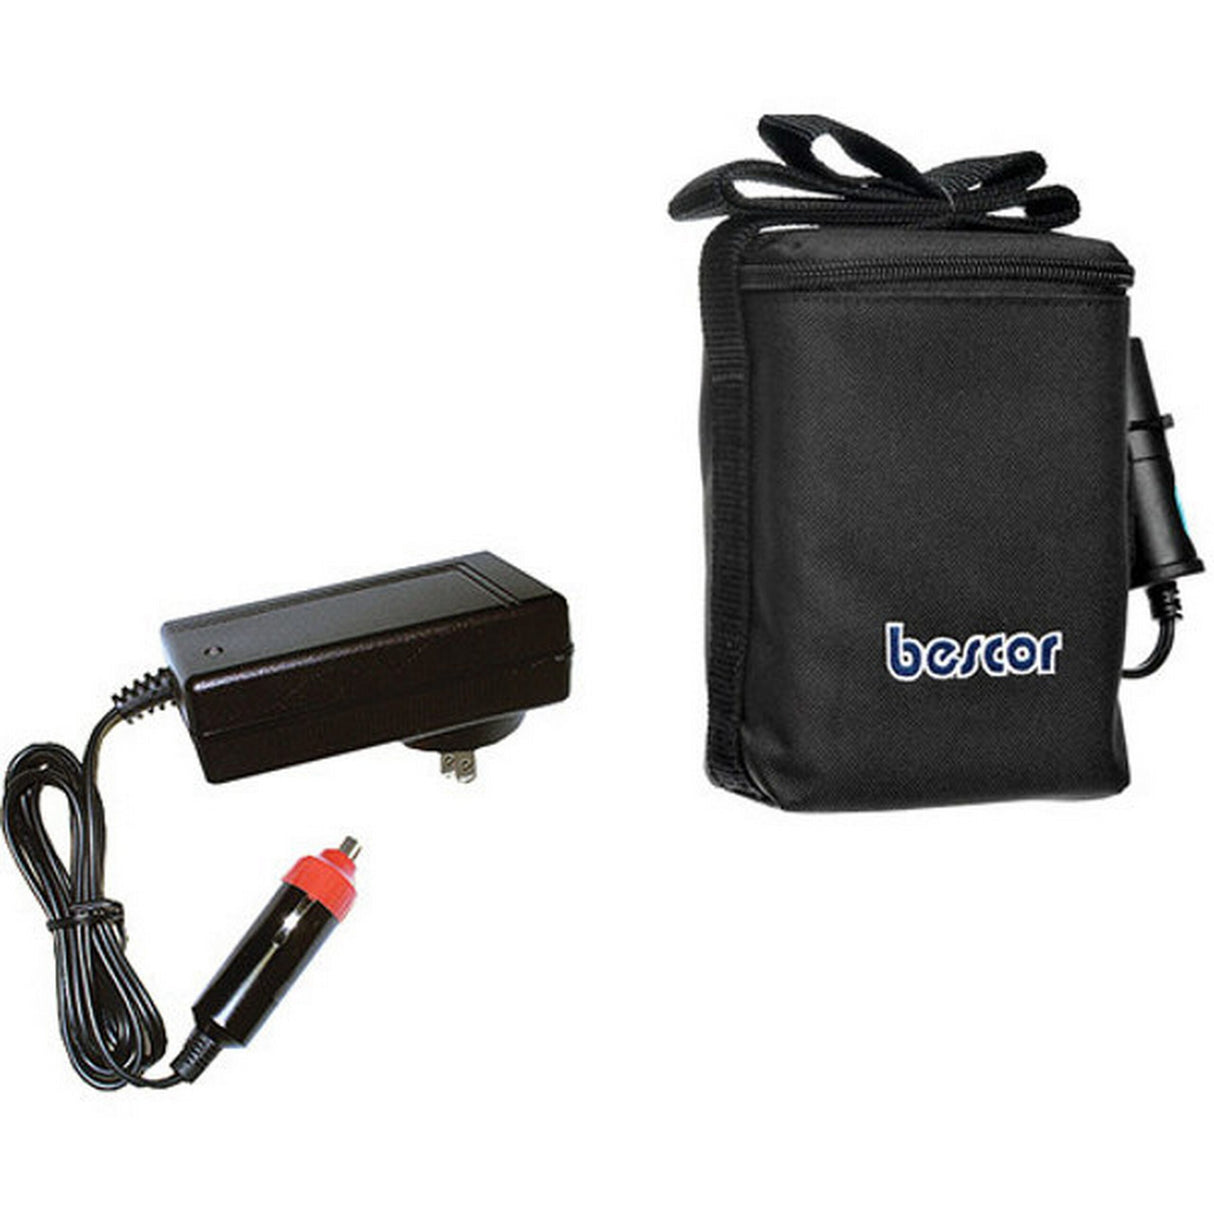 Bescor MM-7ATM 12V/7A SLA Battery Pack and Auto Charger